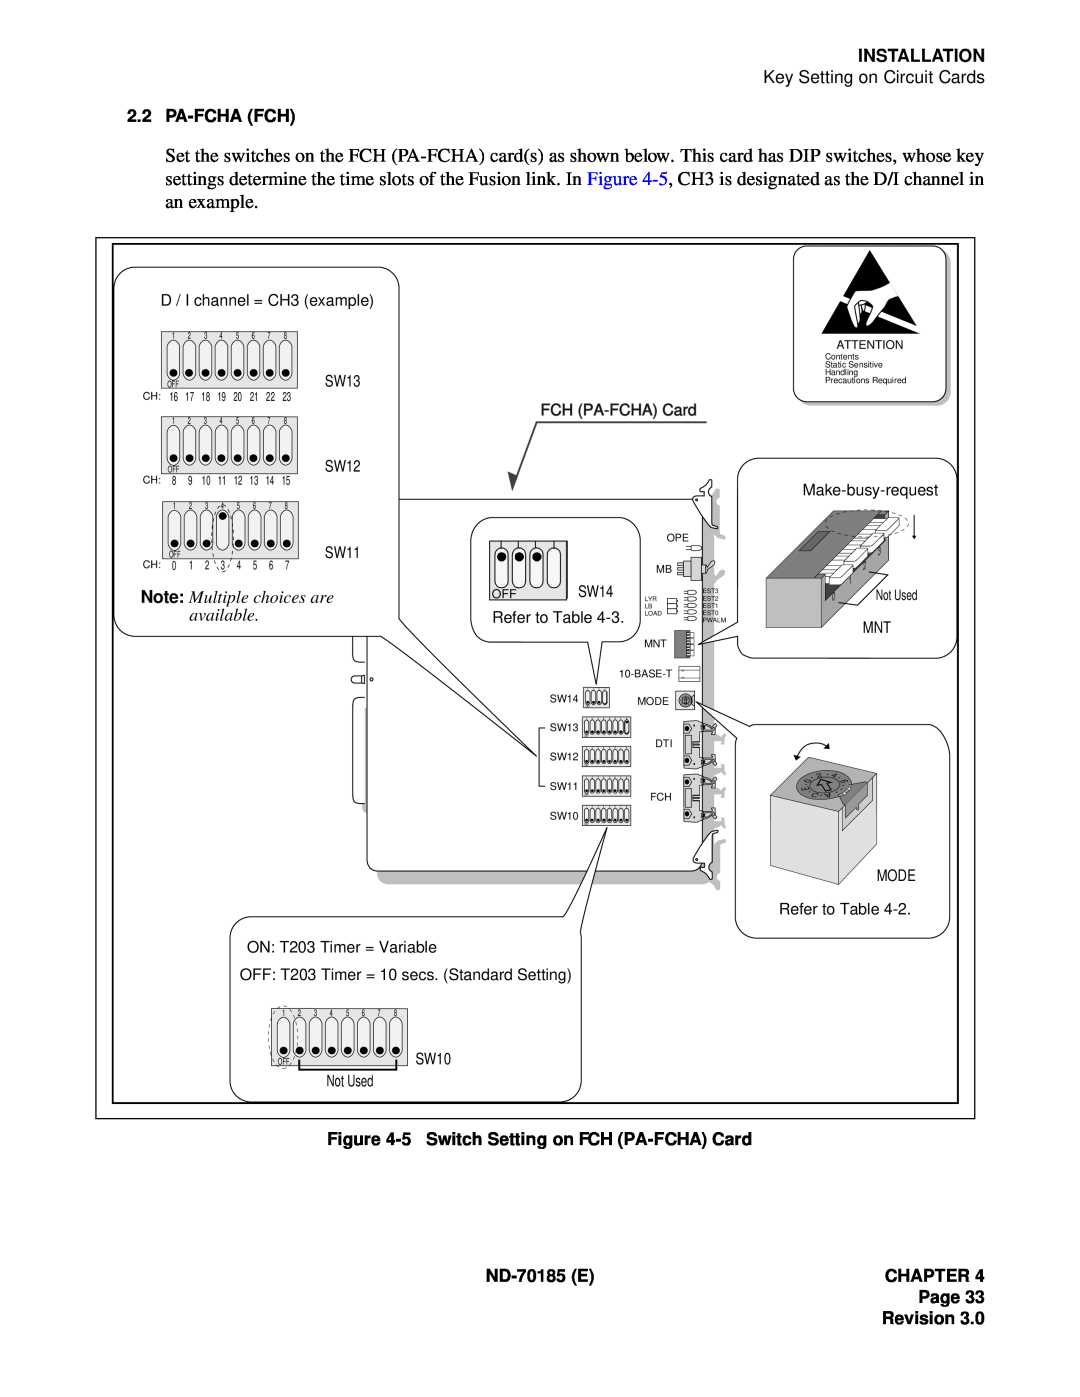 NEC NEAX2400 Installation, 2.2PA-FCHAFCH, available, 5Switch Setting on FCH PA-FCHACard, ND-70185ECHAPTER Page Revision 